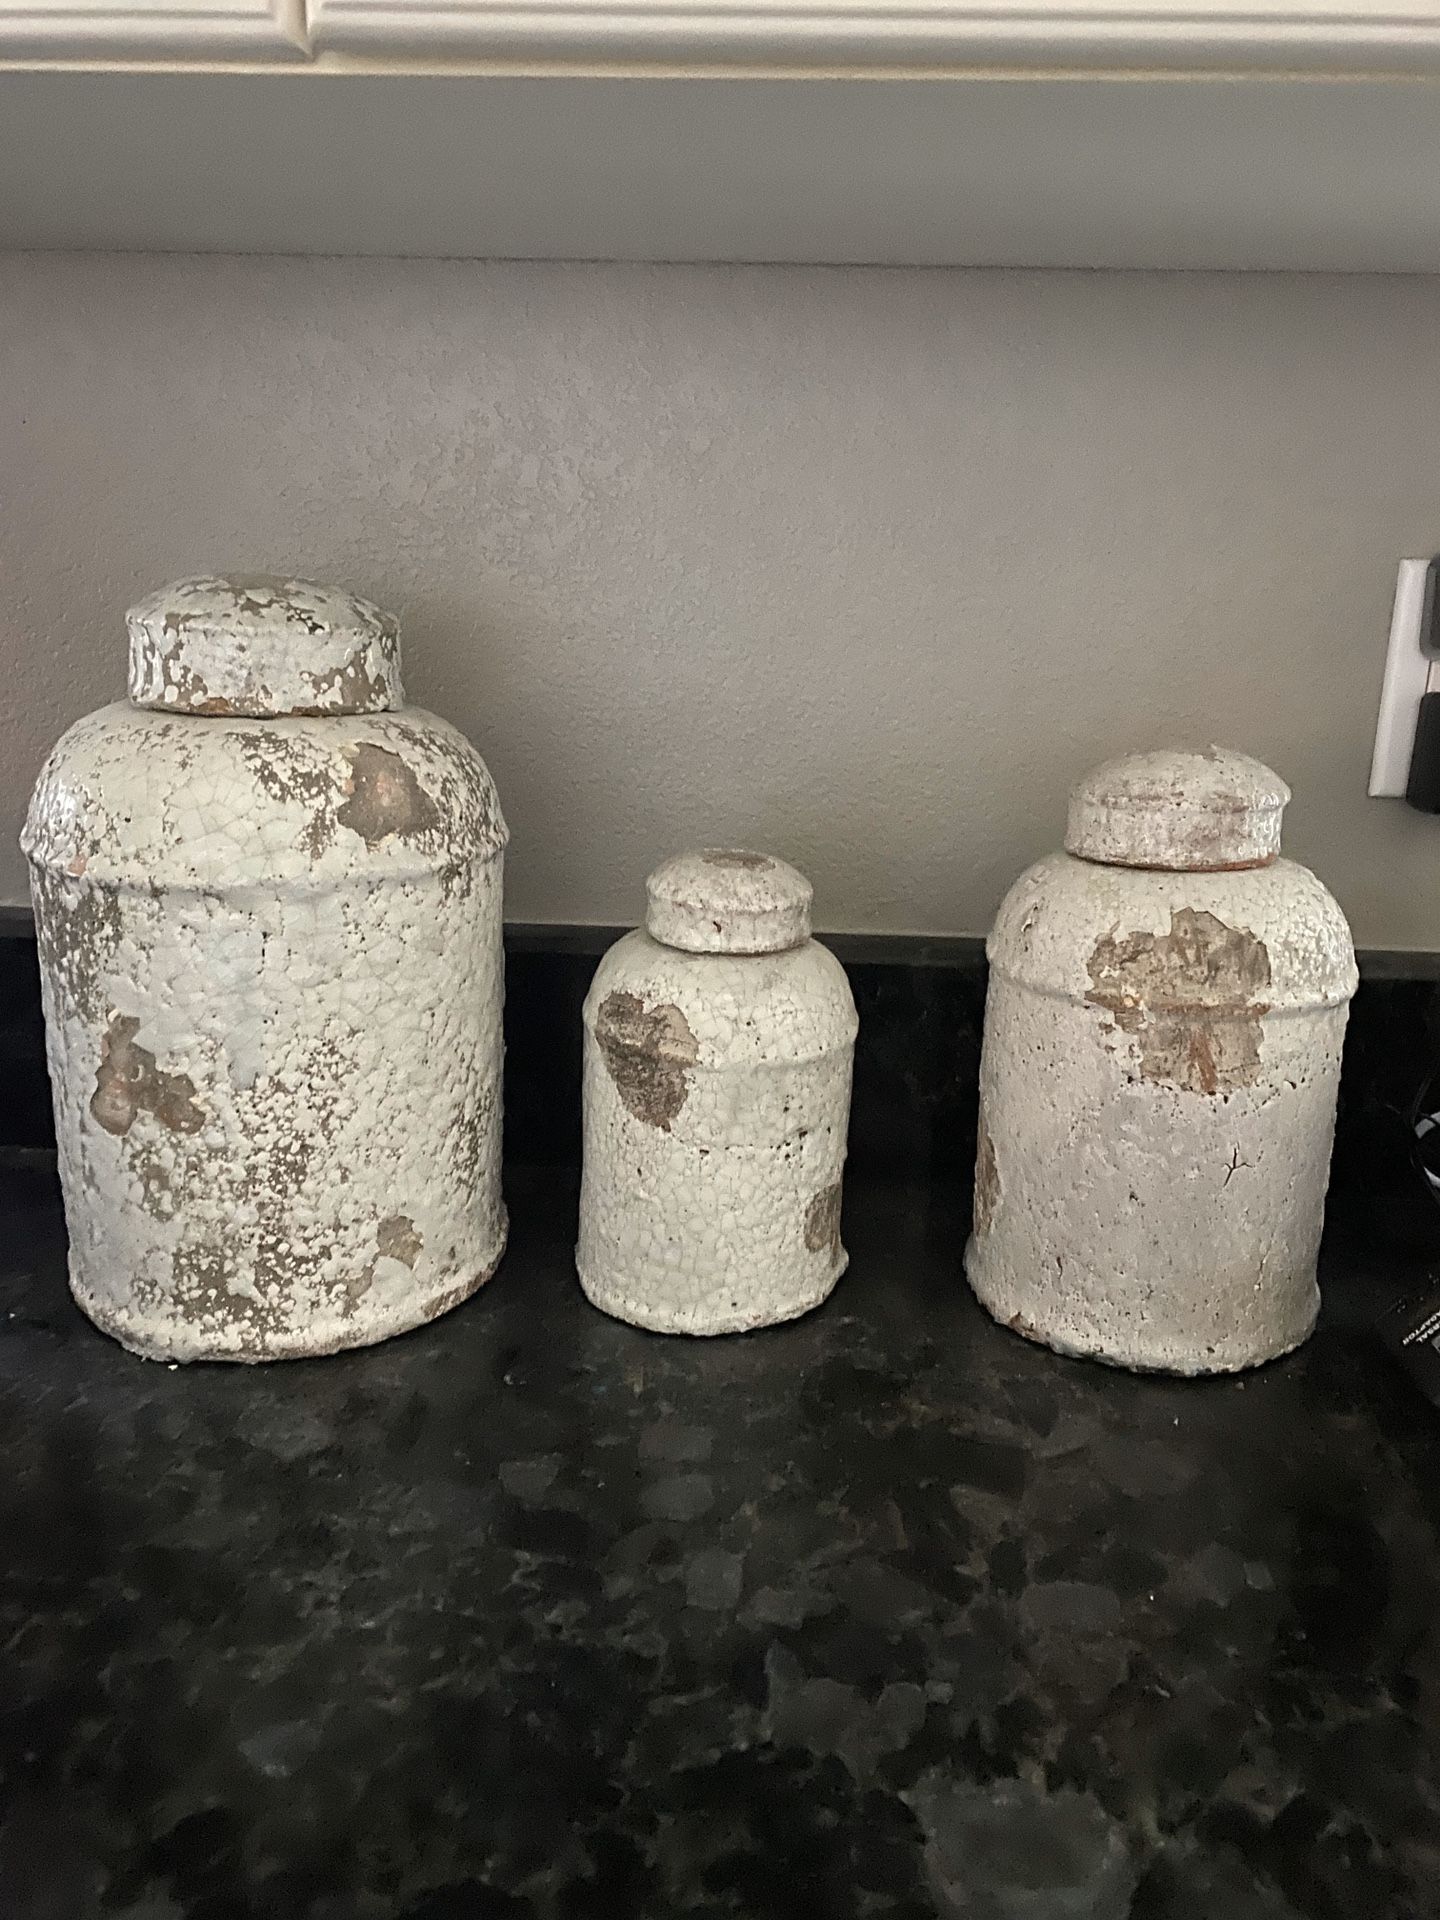 Canisters/decor